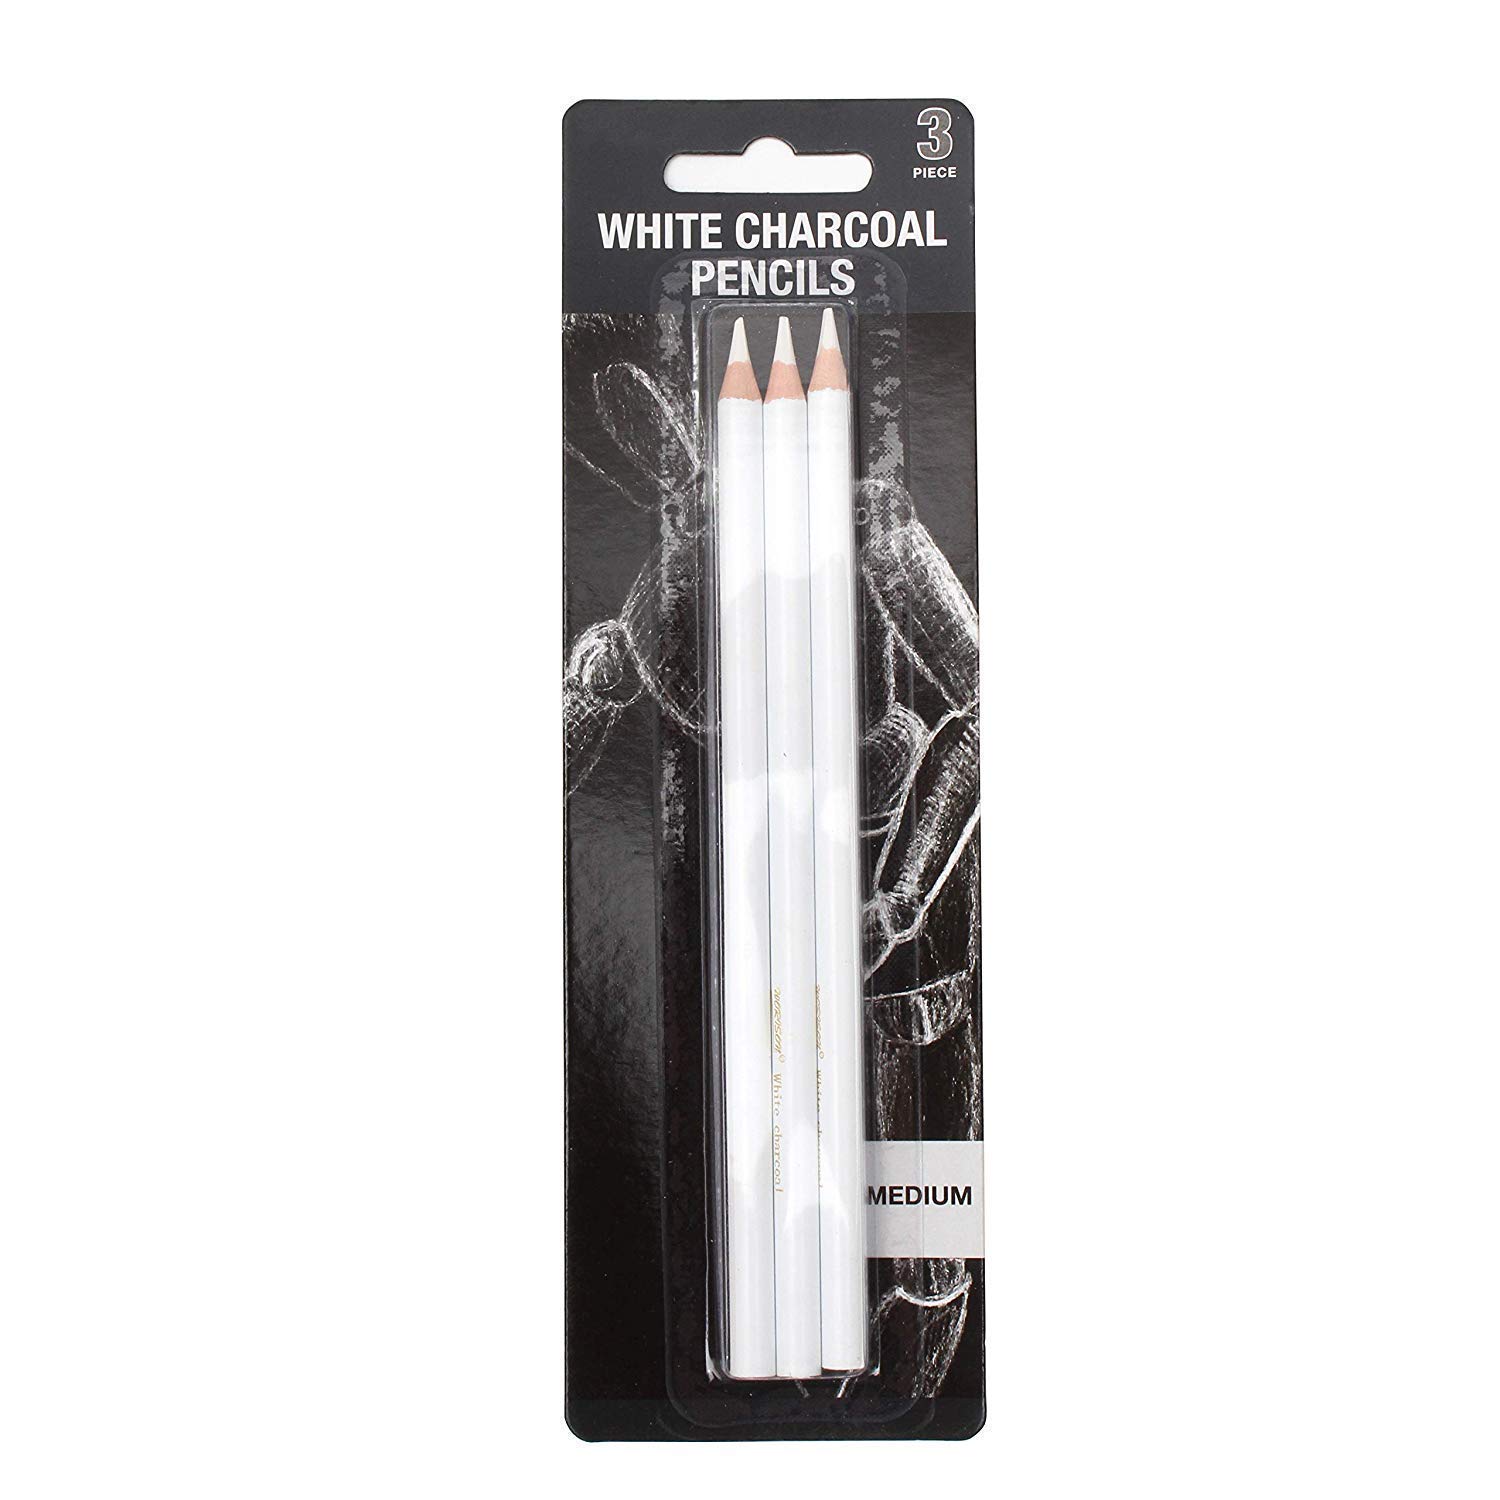 WORISON White Charcoal Pencil Set of 3 Artistic Quality Pencil for Sketching, Drawing